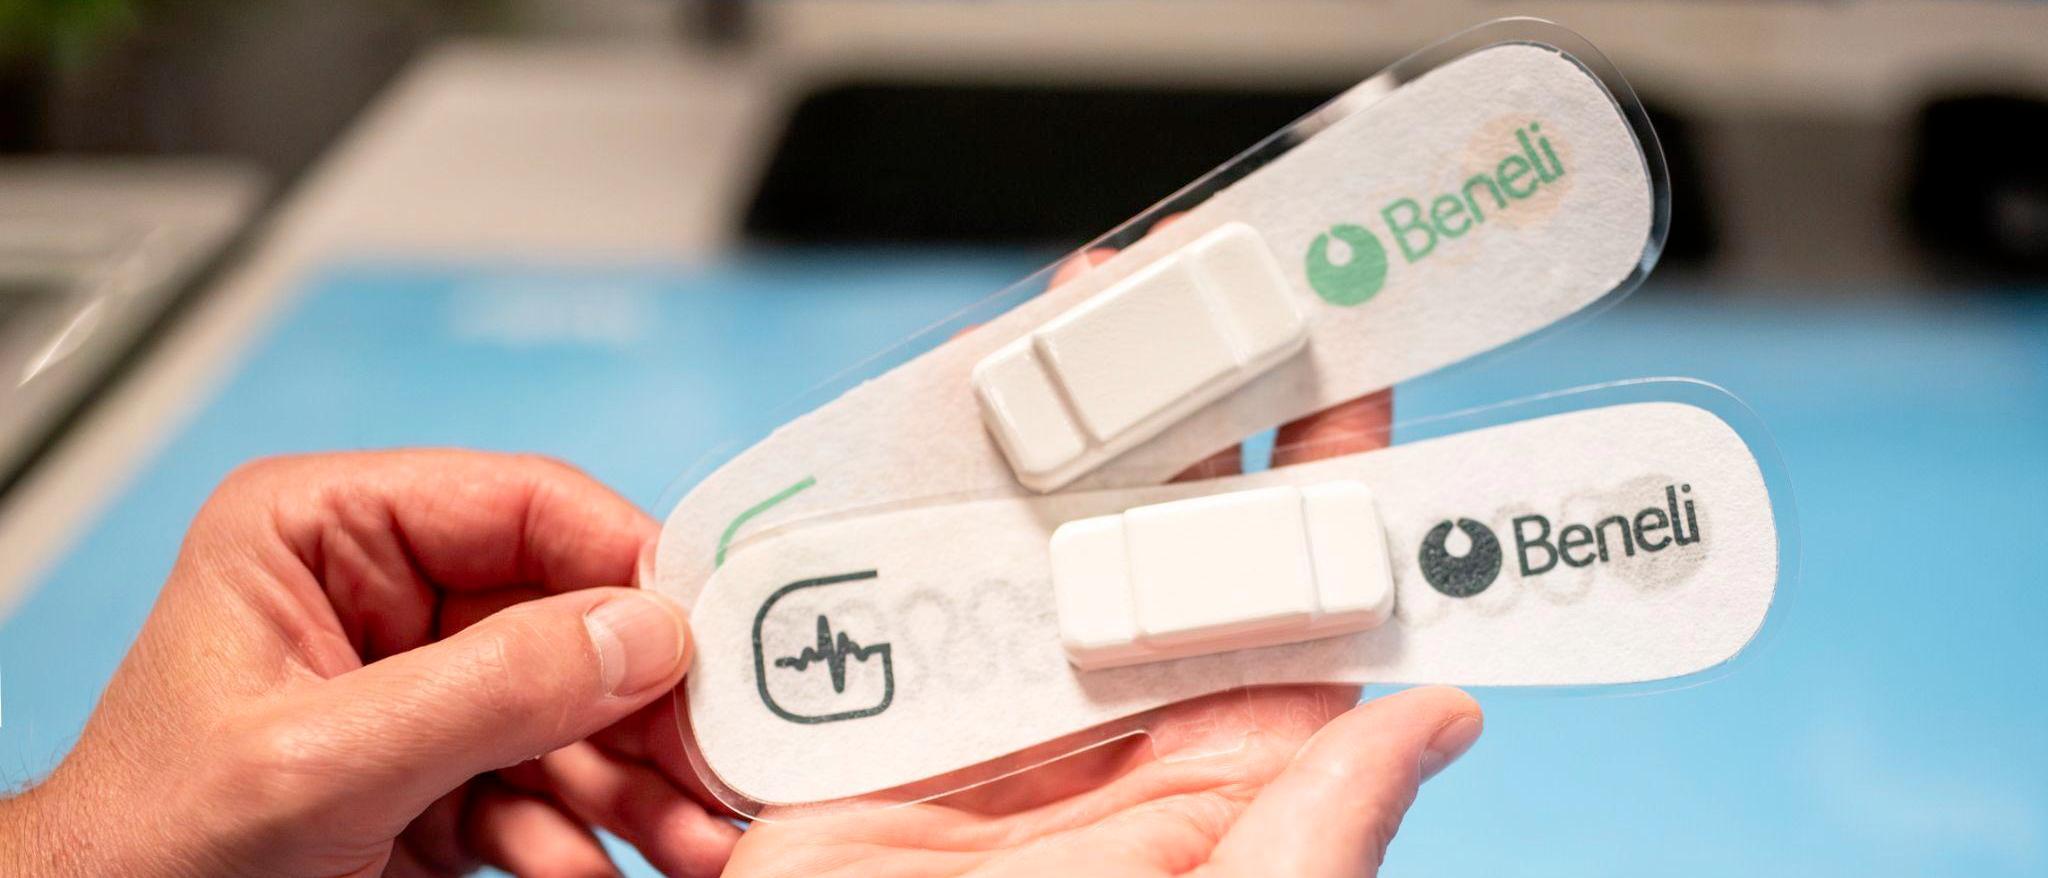 Beneli’s wearable and stretchable health patch